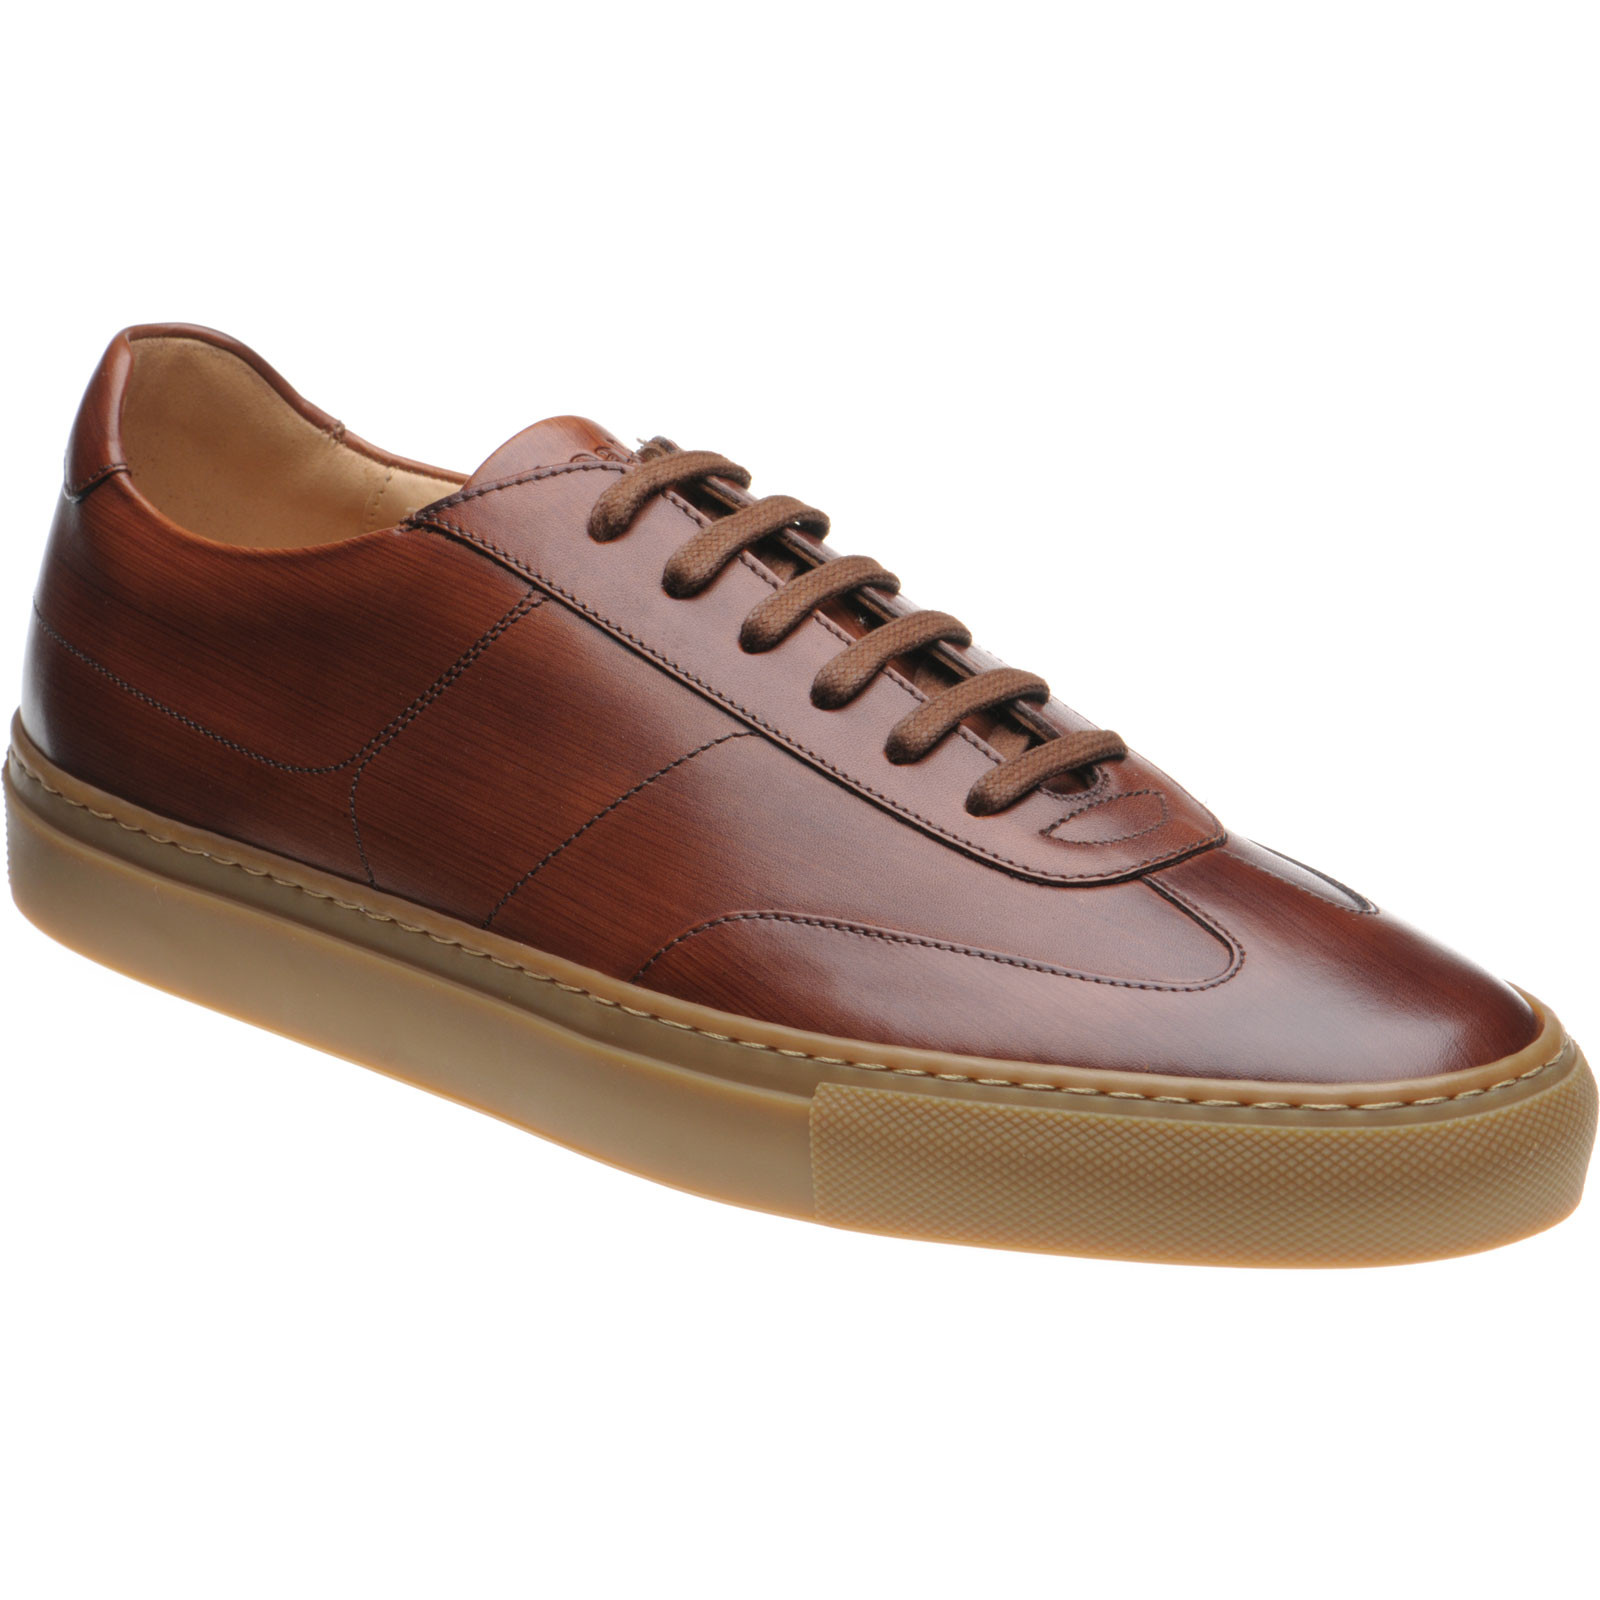 Loake shoes | Loake Design | Owens rubber-soled trainers in Chestnut ...